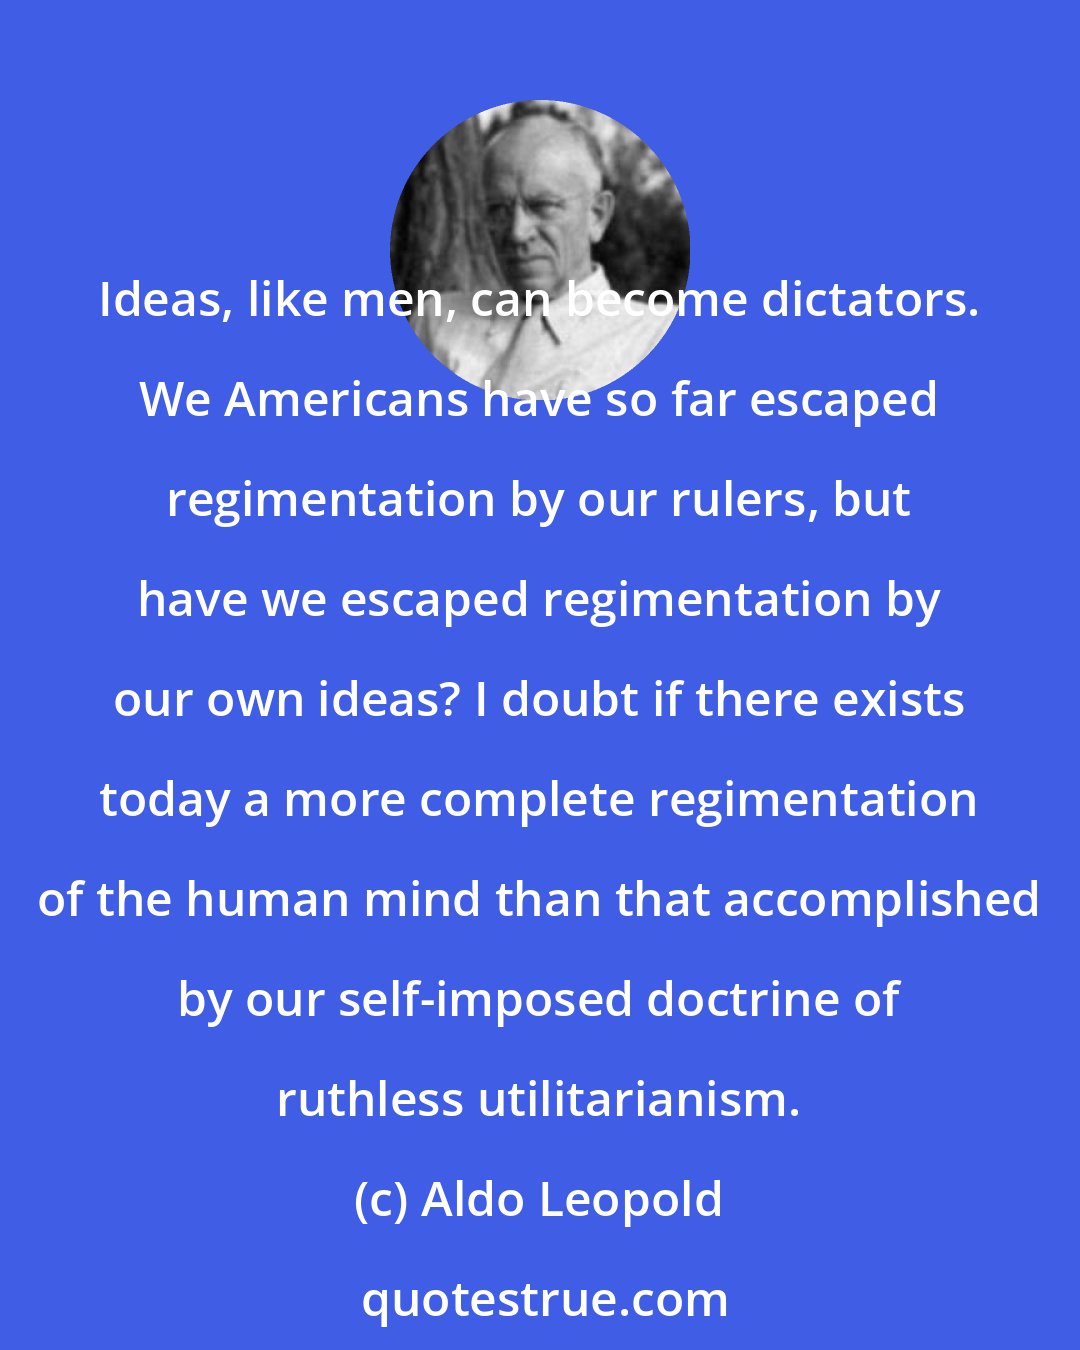 Aldo Leopold: Ideas, like men, can become dictators. We Americans have so far escaped regimentation by our rulers, but have we escaped regimentation by our own ideas? I doubt if there exists today a more complete regimentation of the human mind than that accomplished by our self-imposed doctrine of ruthless utilitarianism.